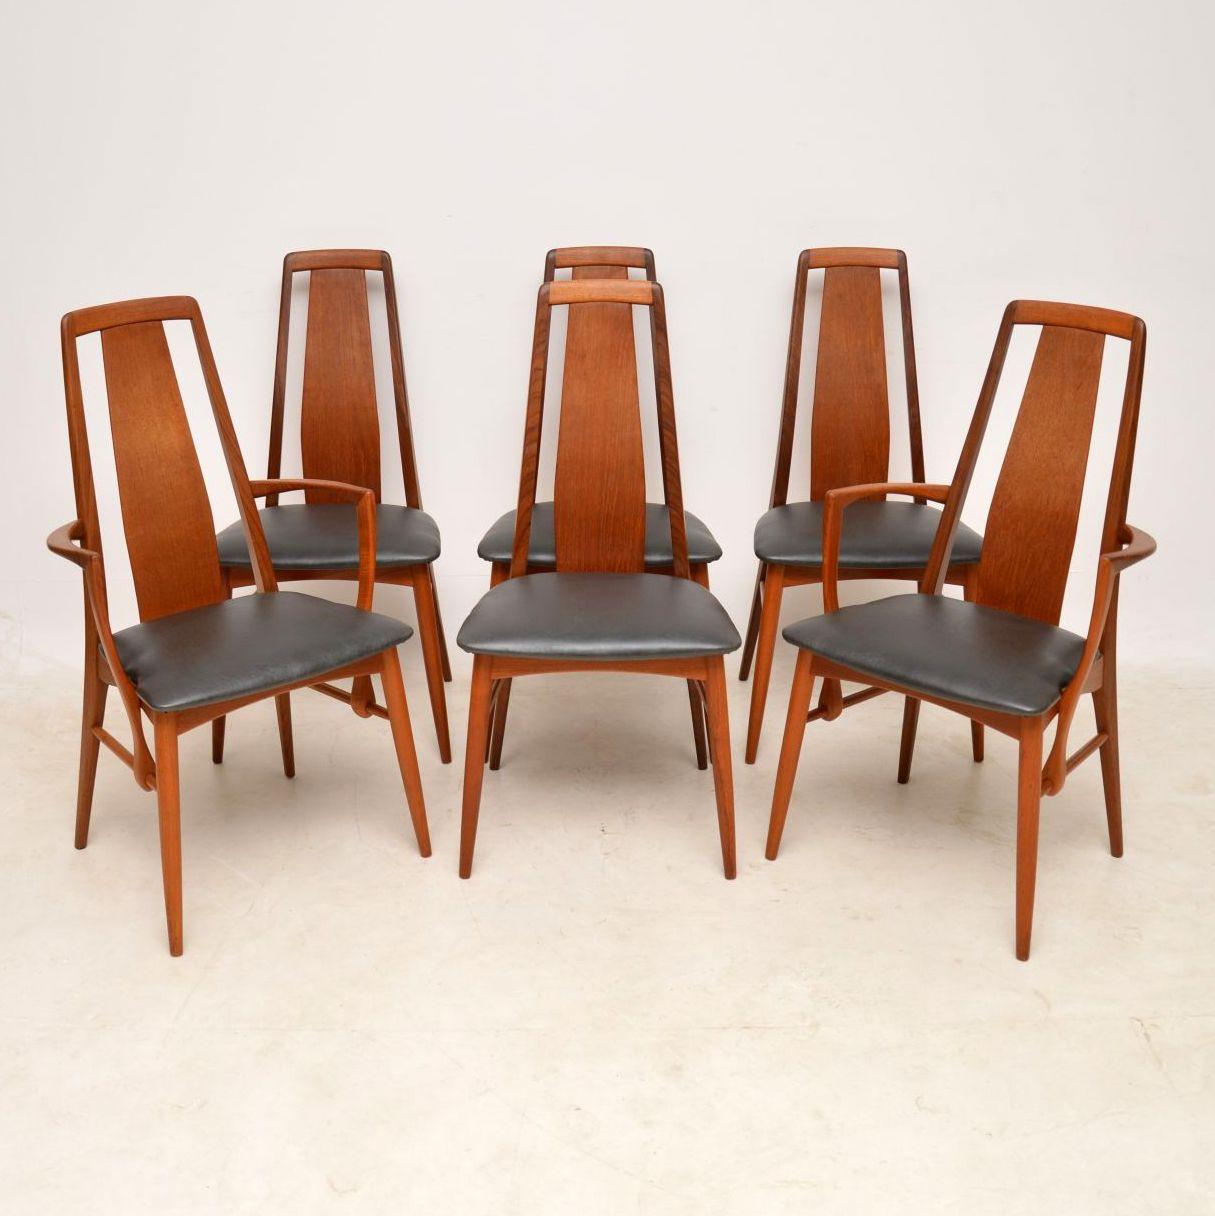 A beautiful set of six Danish vintage teak dining chairs, these are called ‘Eva’ chairs, they were designed by Niels Koefoed, they date from the 1960’s. They are of superb quality and are in excellent condition for their age, there is only some